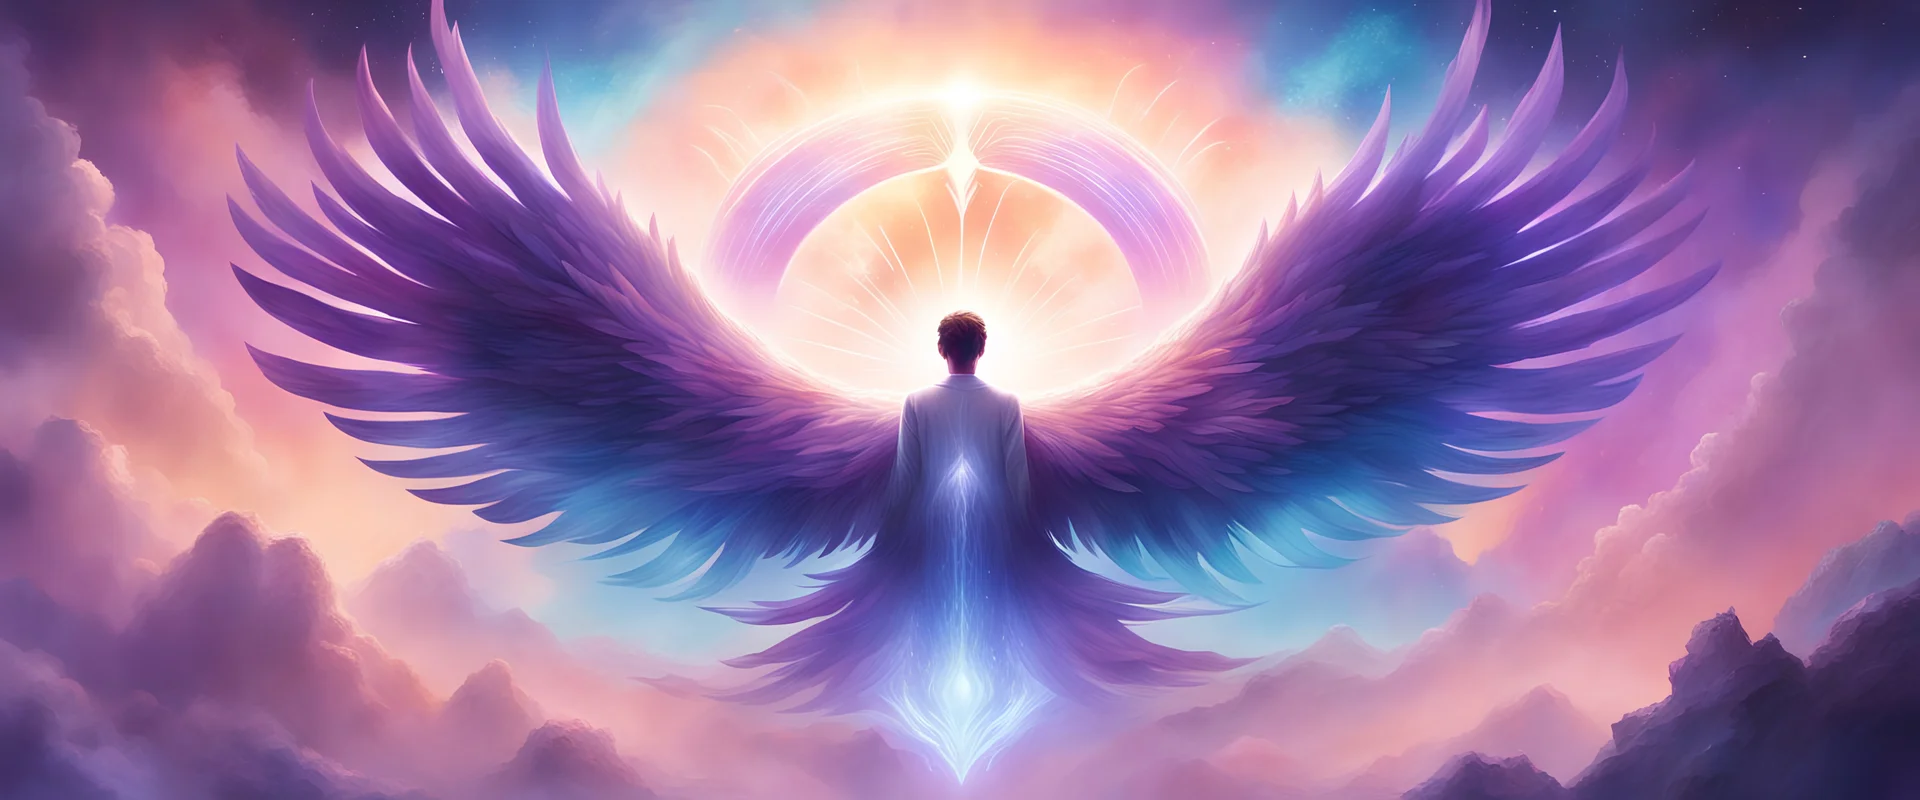 The album cover features a celestial dreamscape with cascading clouds and ethereal light. Soft pastel hues of purples and blues evoke a sense of serenity and emotion. Illenium's distinctive phoenix logo rises from the center, symbolizing the transformative and uplifting nature of the artist's melodic compositions.